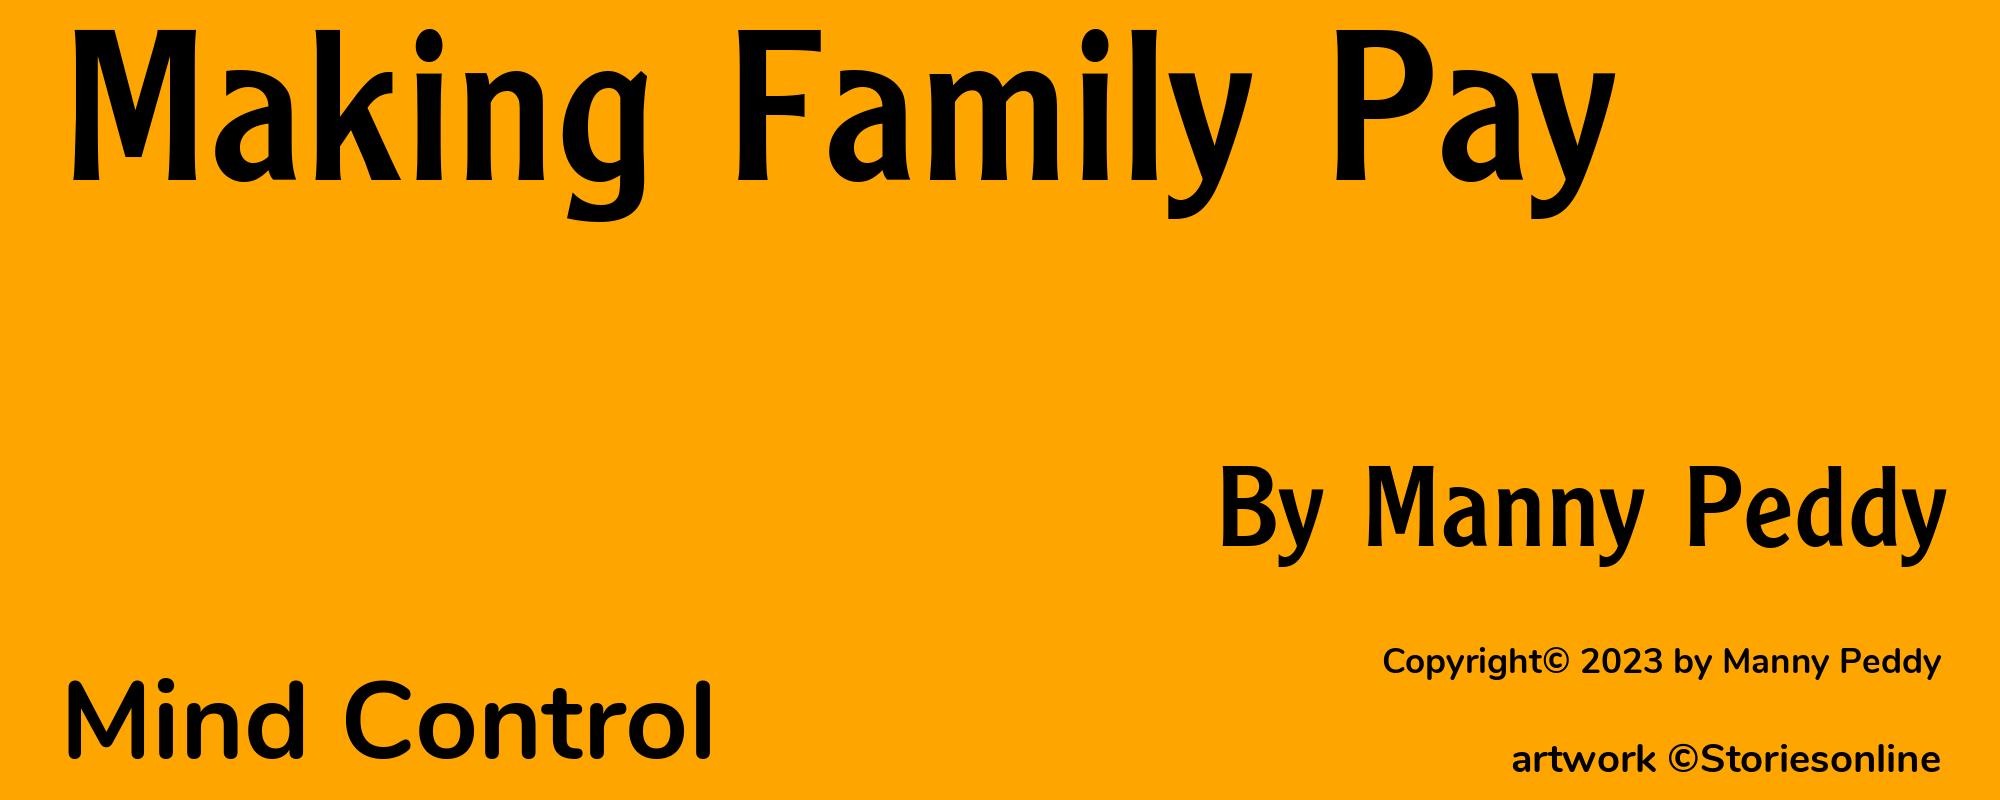 Making Family Pay - Cover